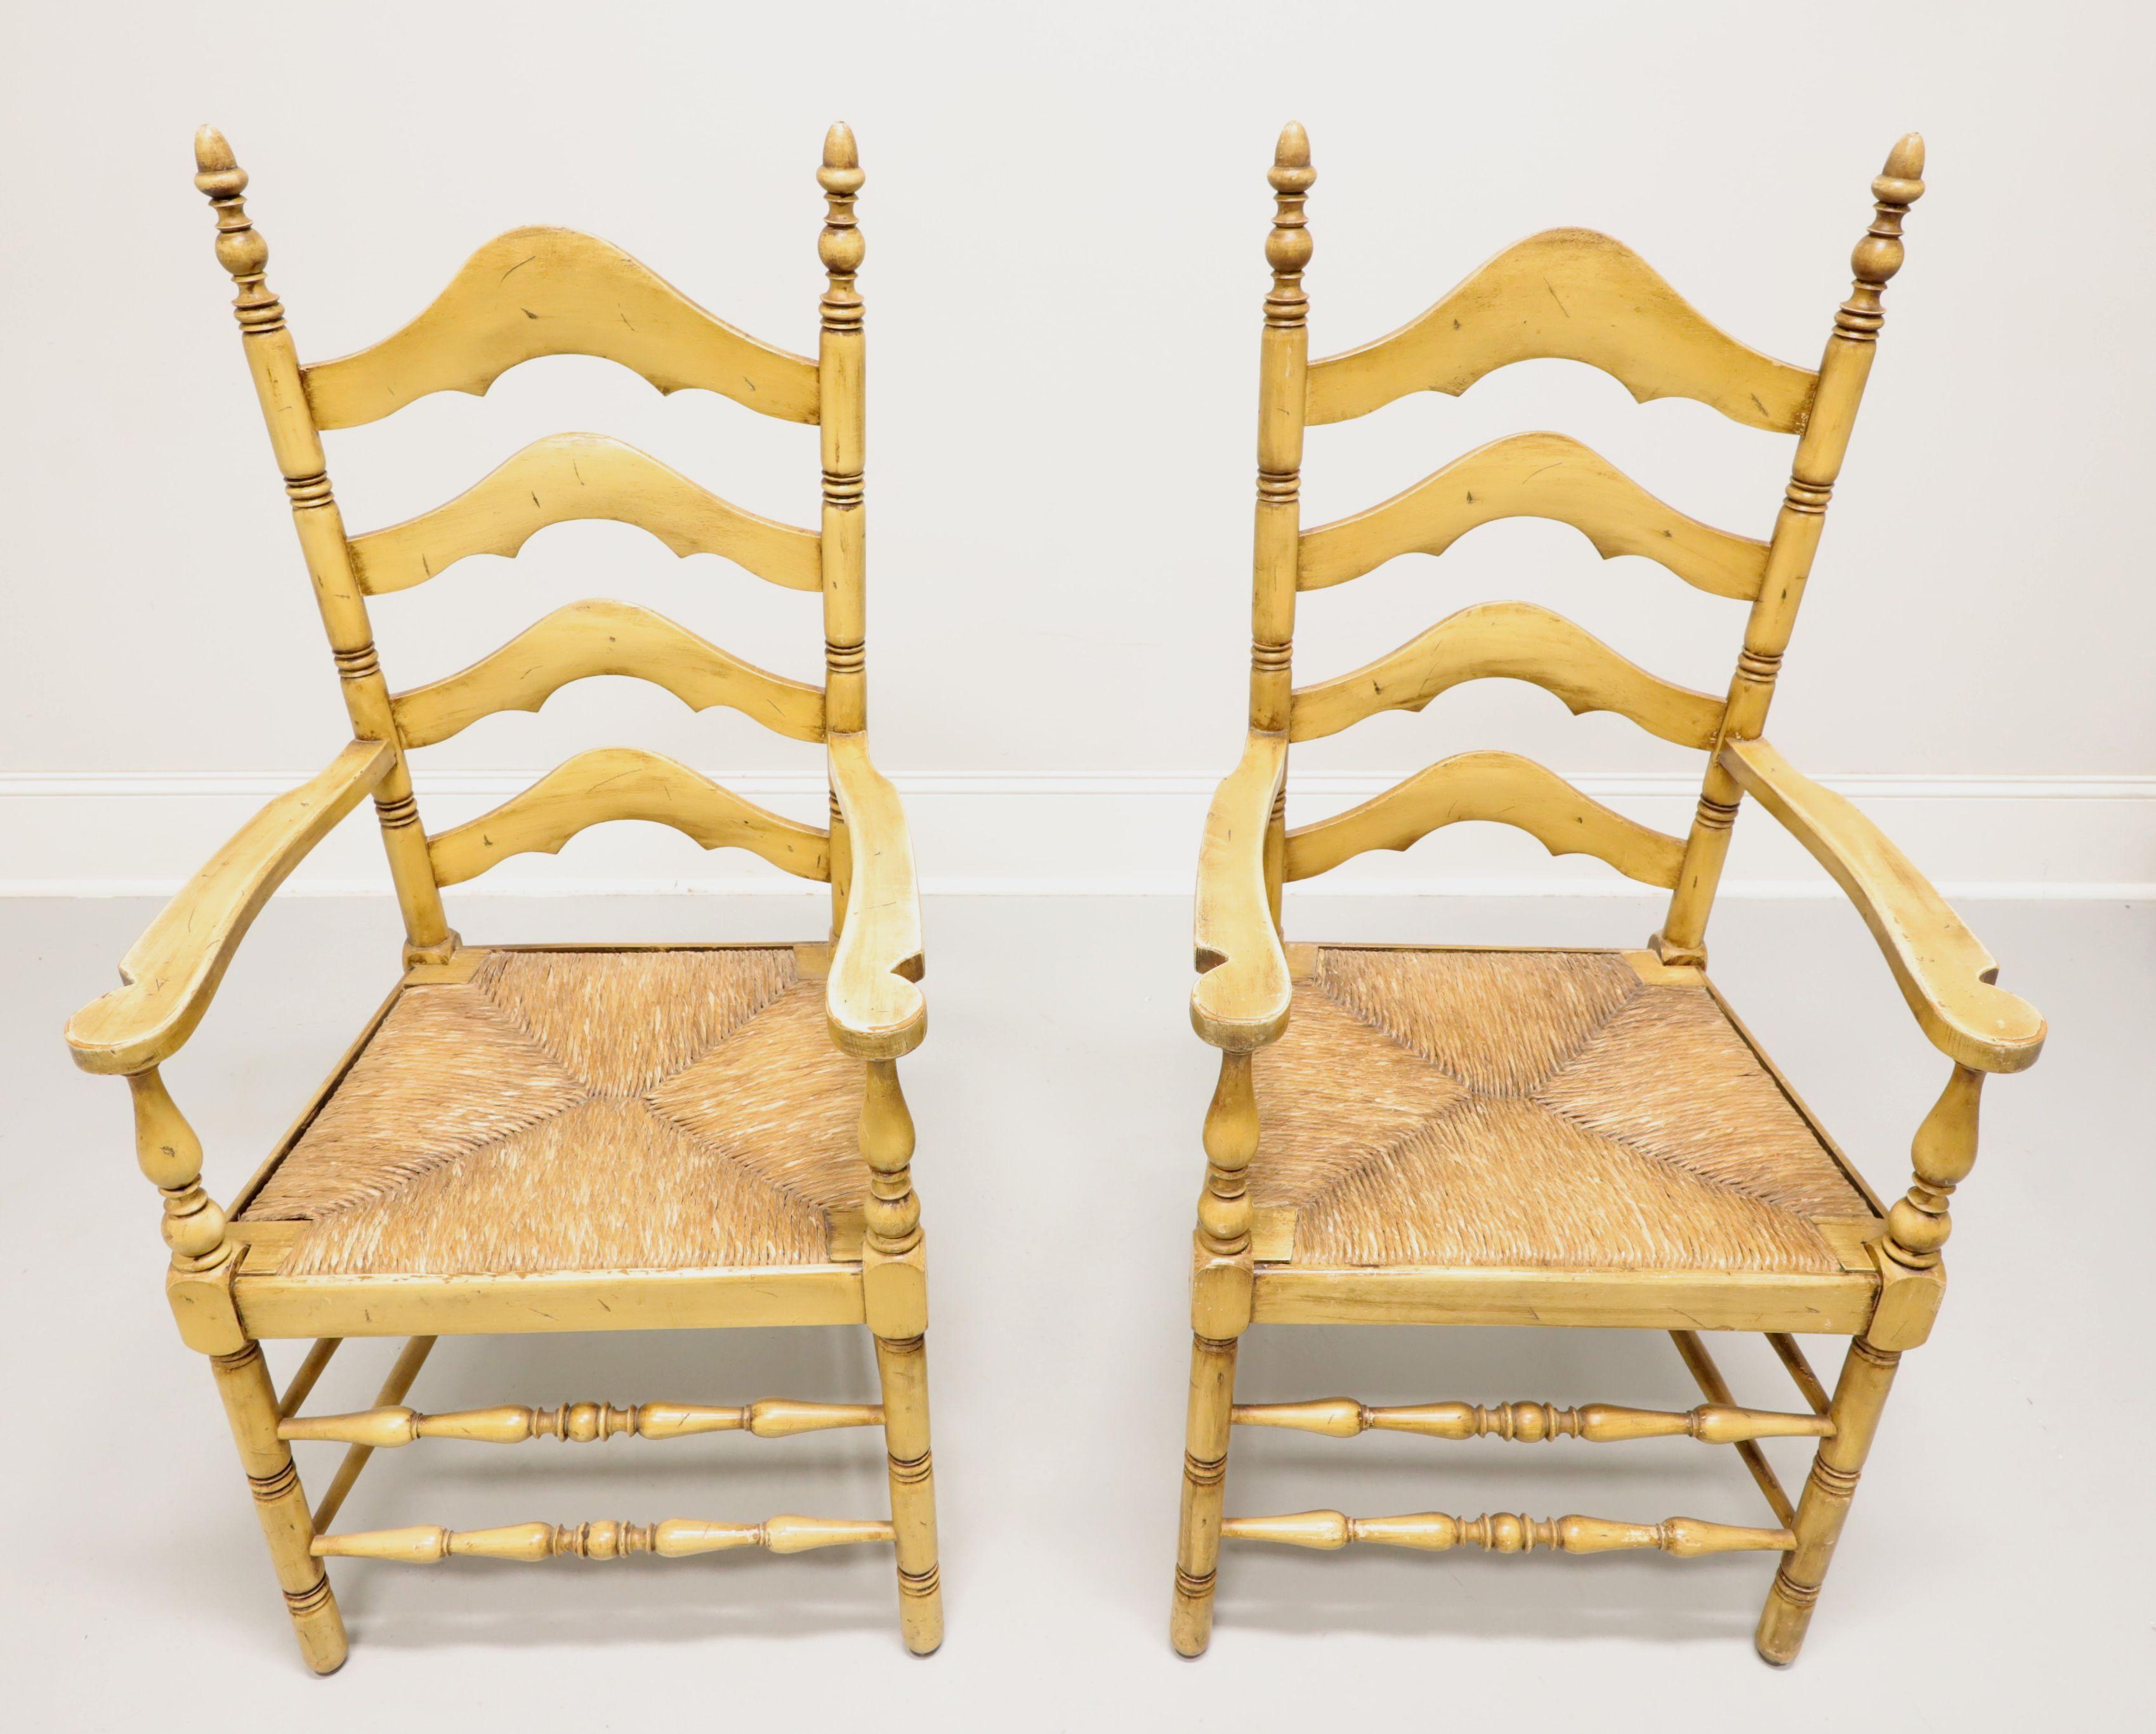 A pair of Cottage / Farmhouse style dining armchairs by Cape Ann Chairs. Maple with carved arched ladder back design, finial capped stiles, slightly curved arms with turned supports, rush seats, turned front legs & front stretchers, and solid back